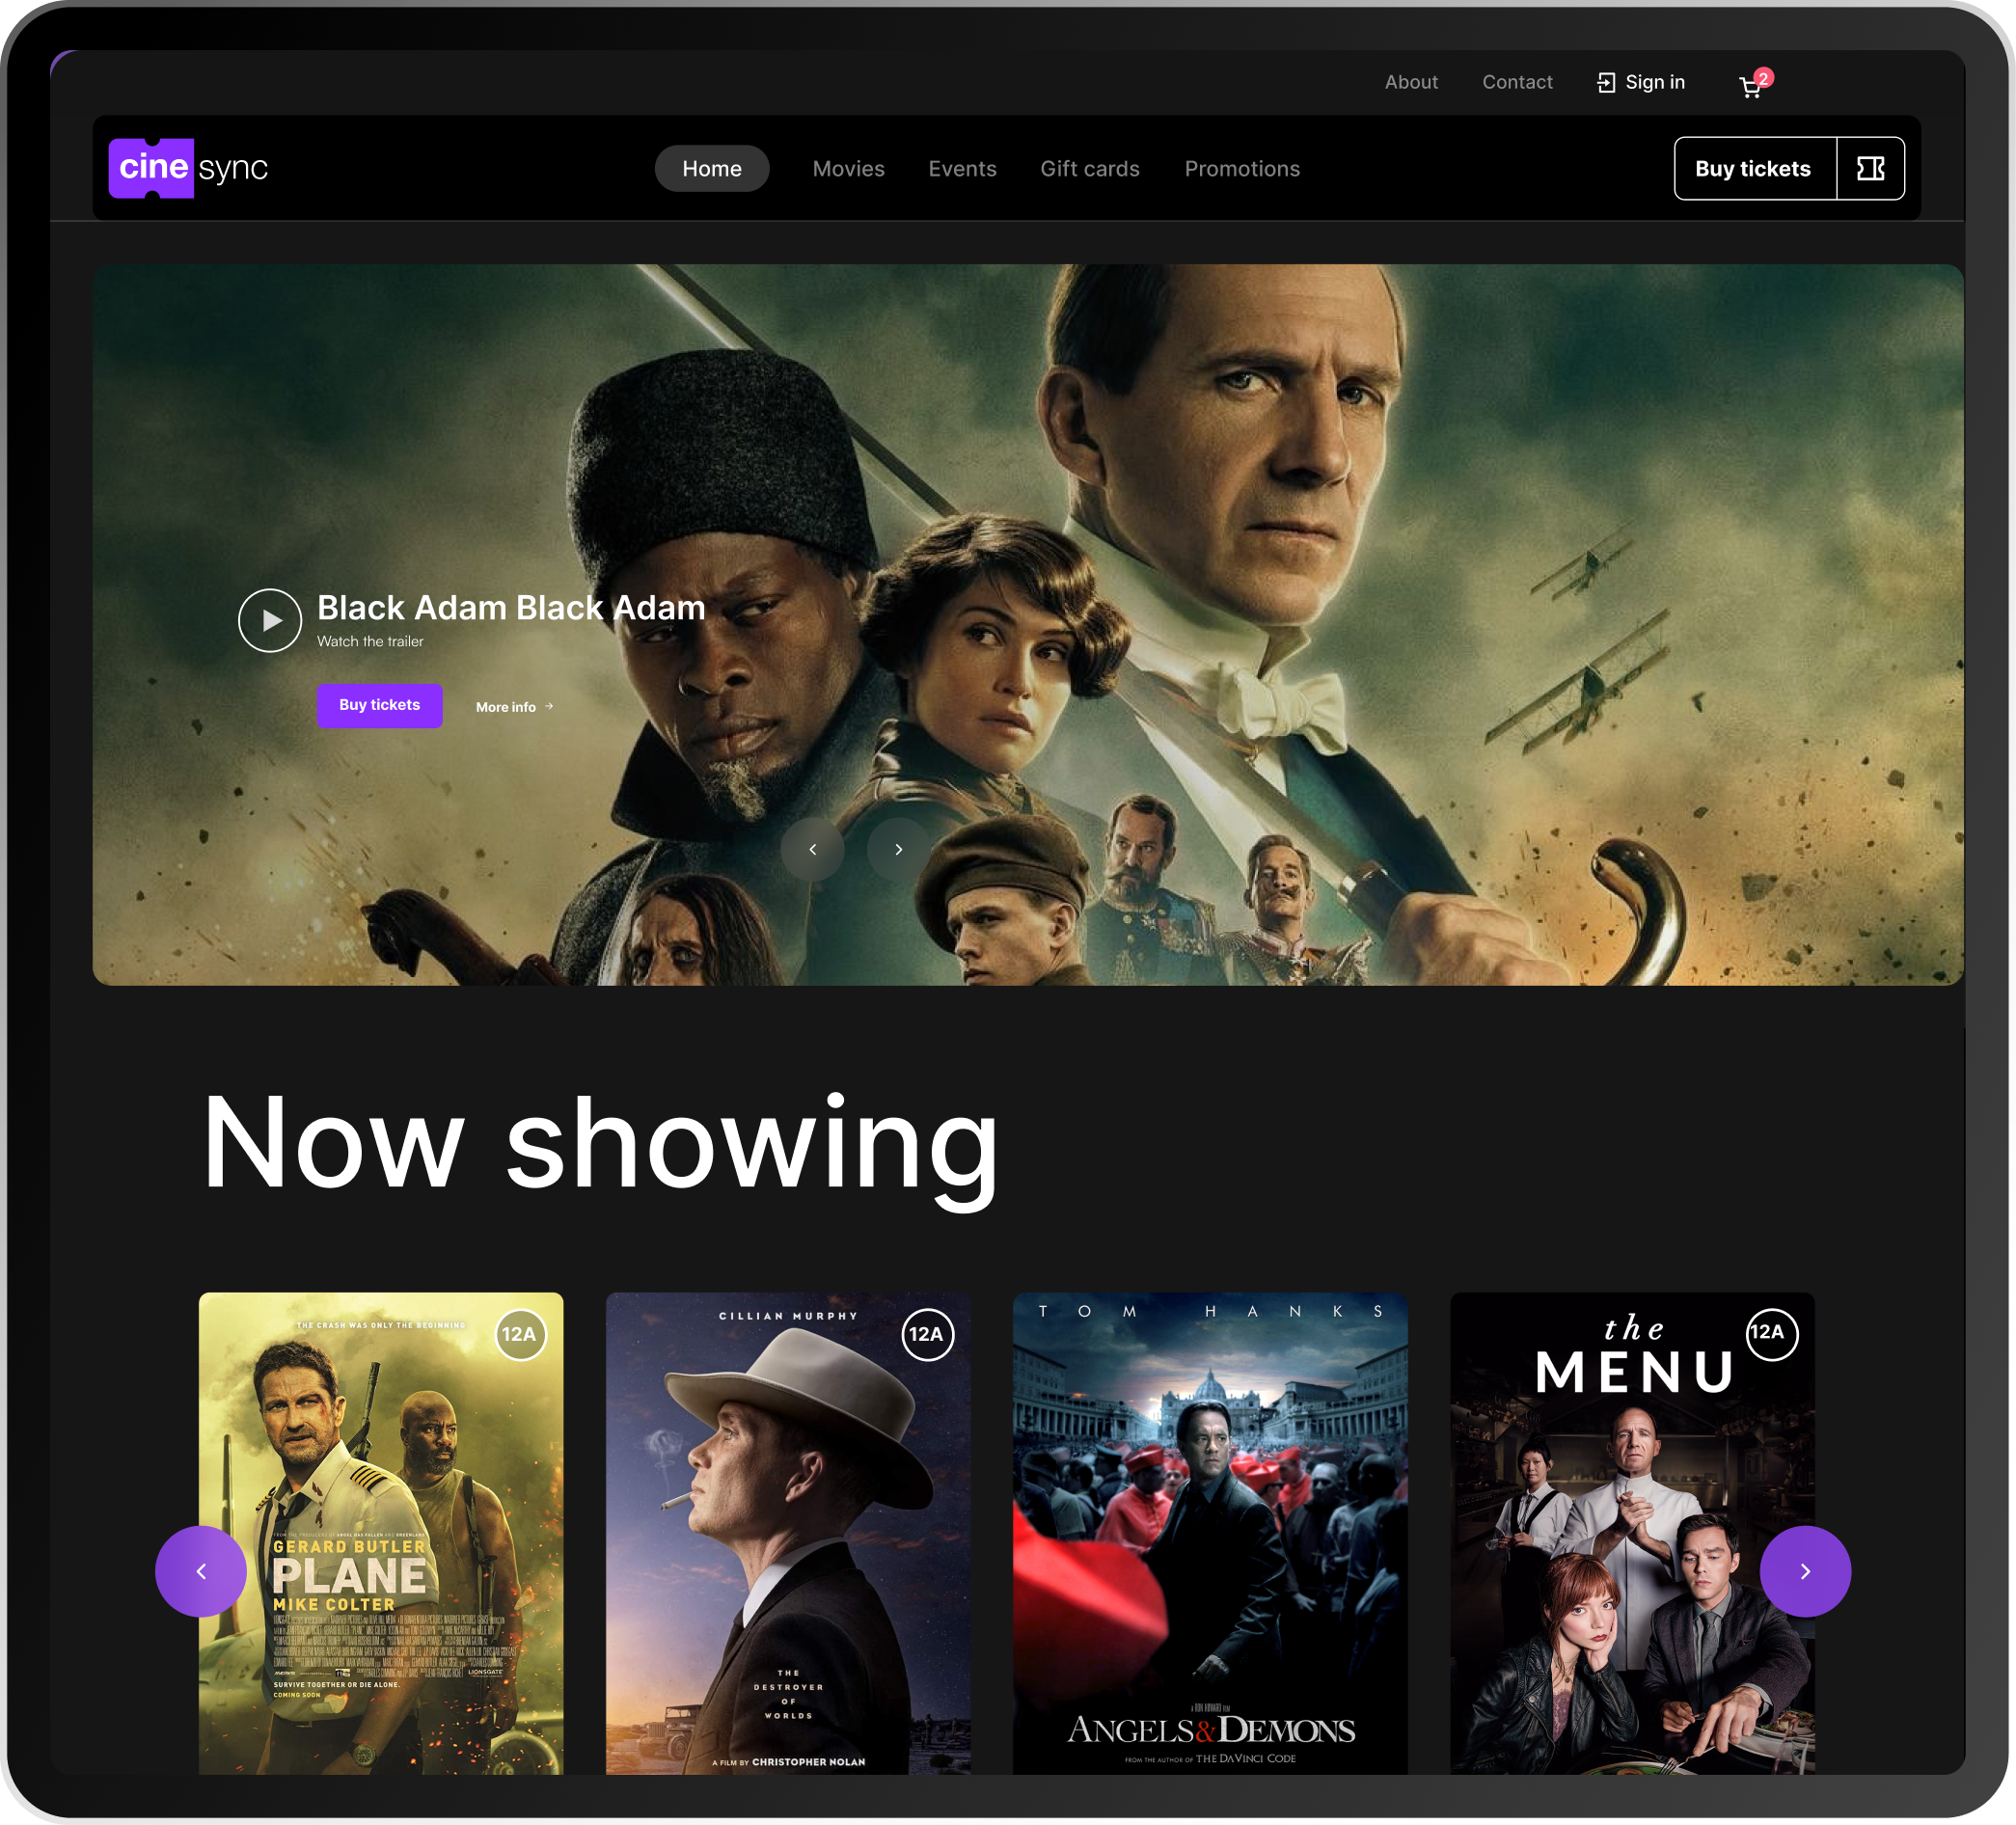 Customised website for customers of the cinema